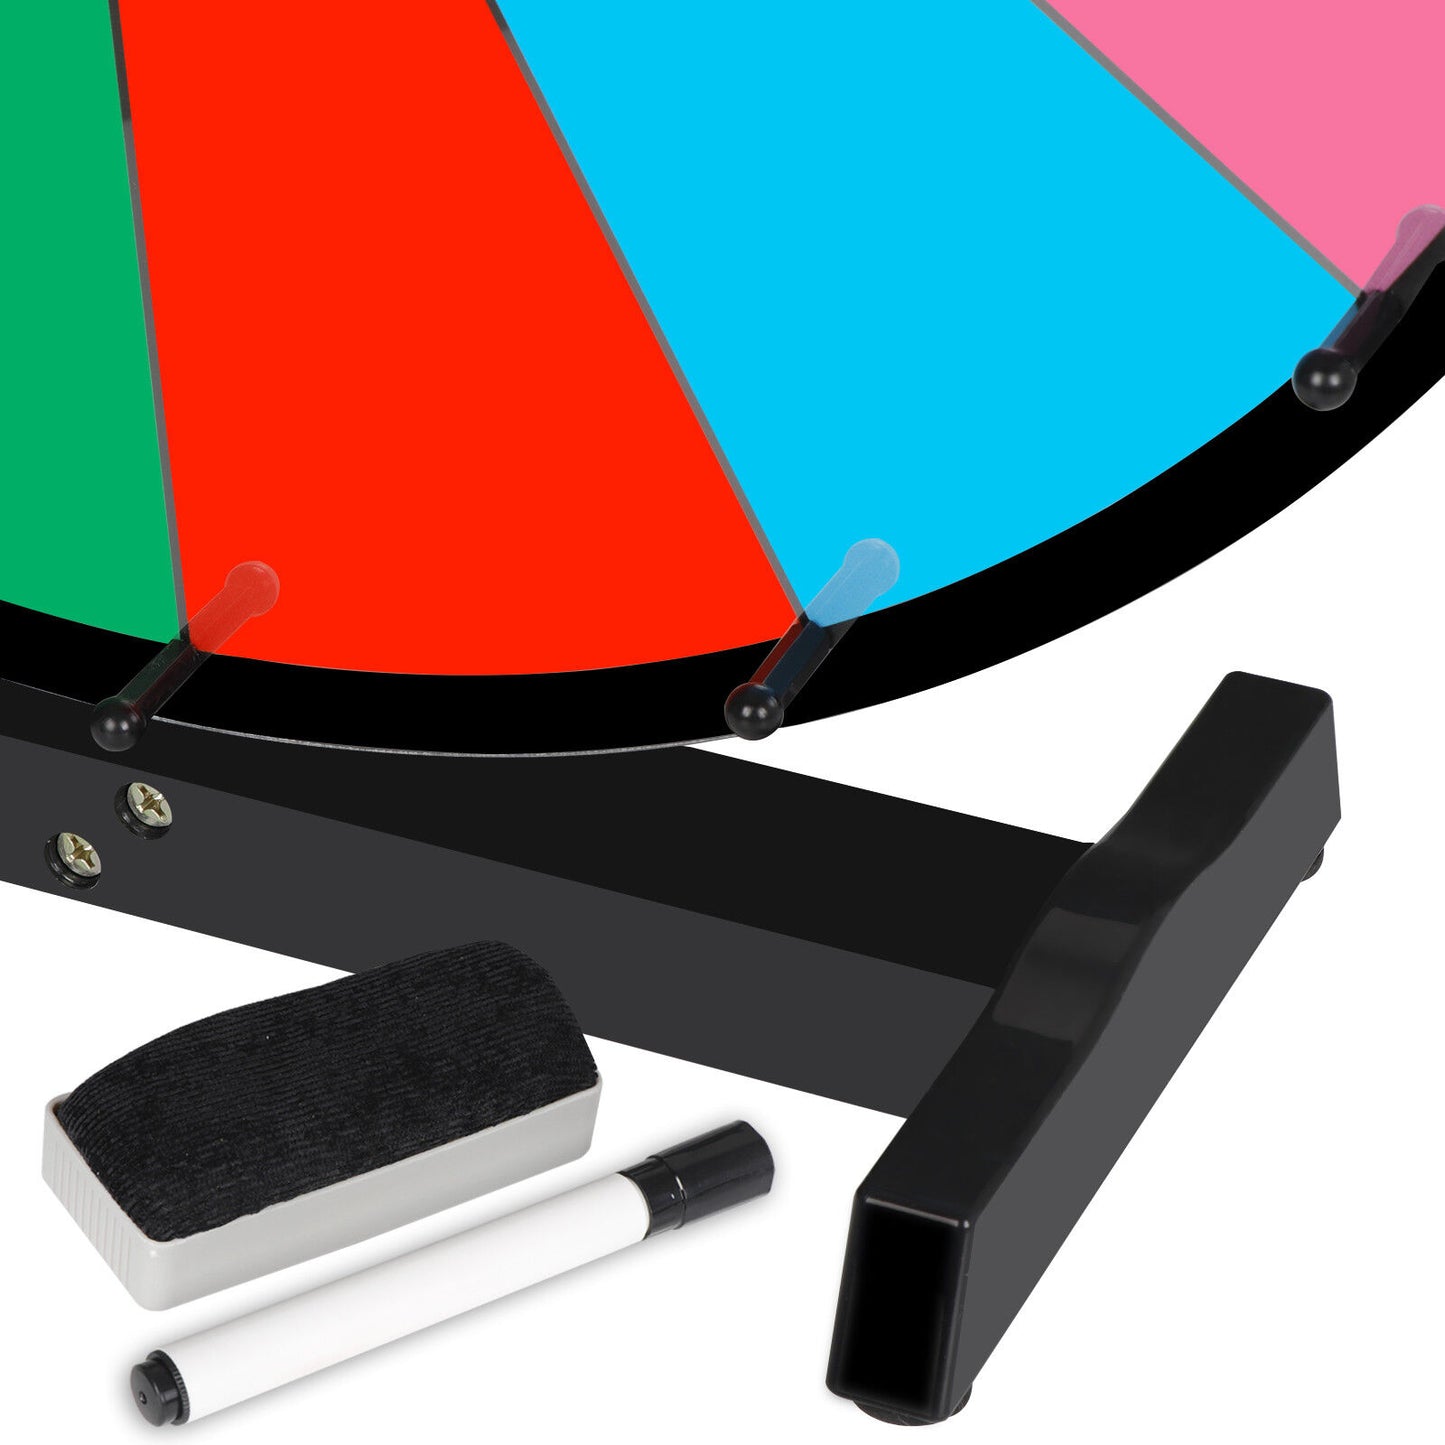 24" Prize Wheel Customizable Color Erasable Board W/Sturdy Stand Tradeshows Game